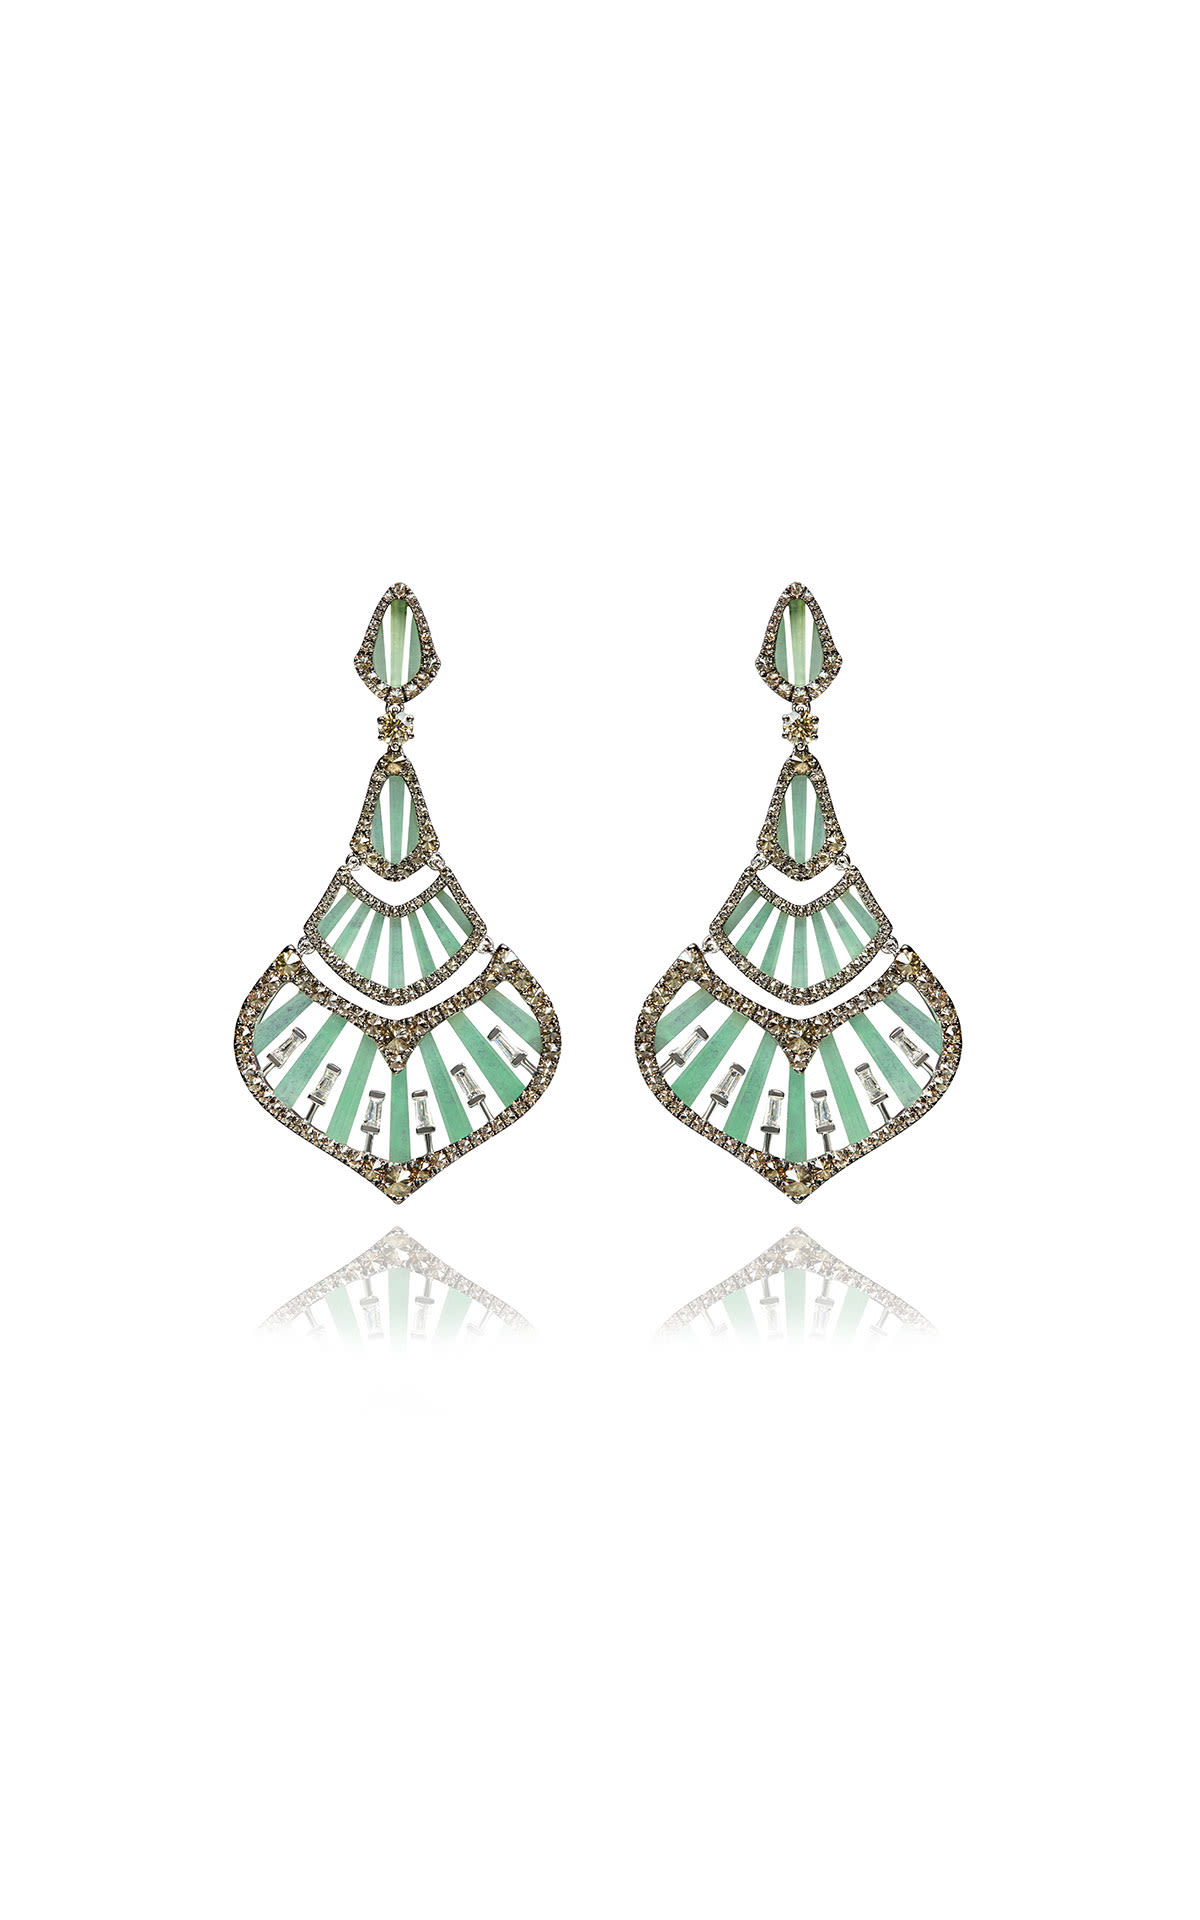 Annoushka Flamenco Jade and diamond earrings from Bicester Village